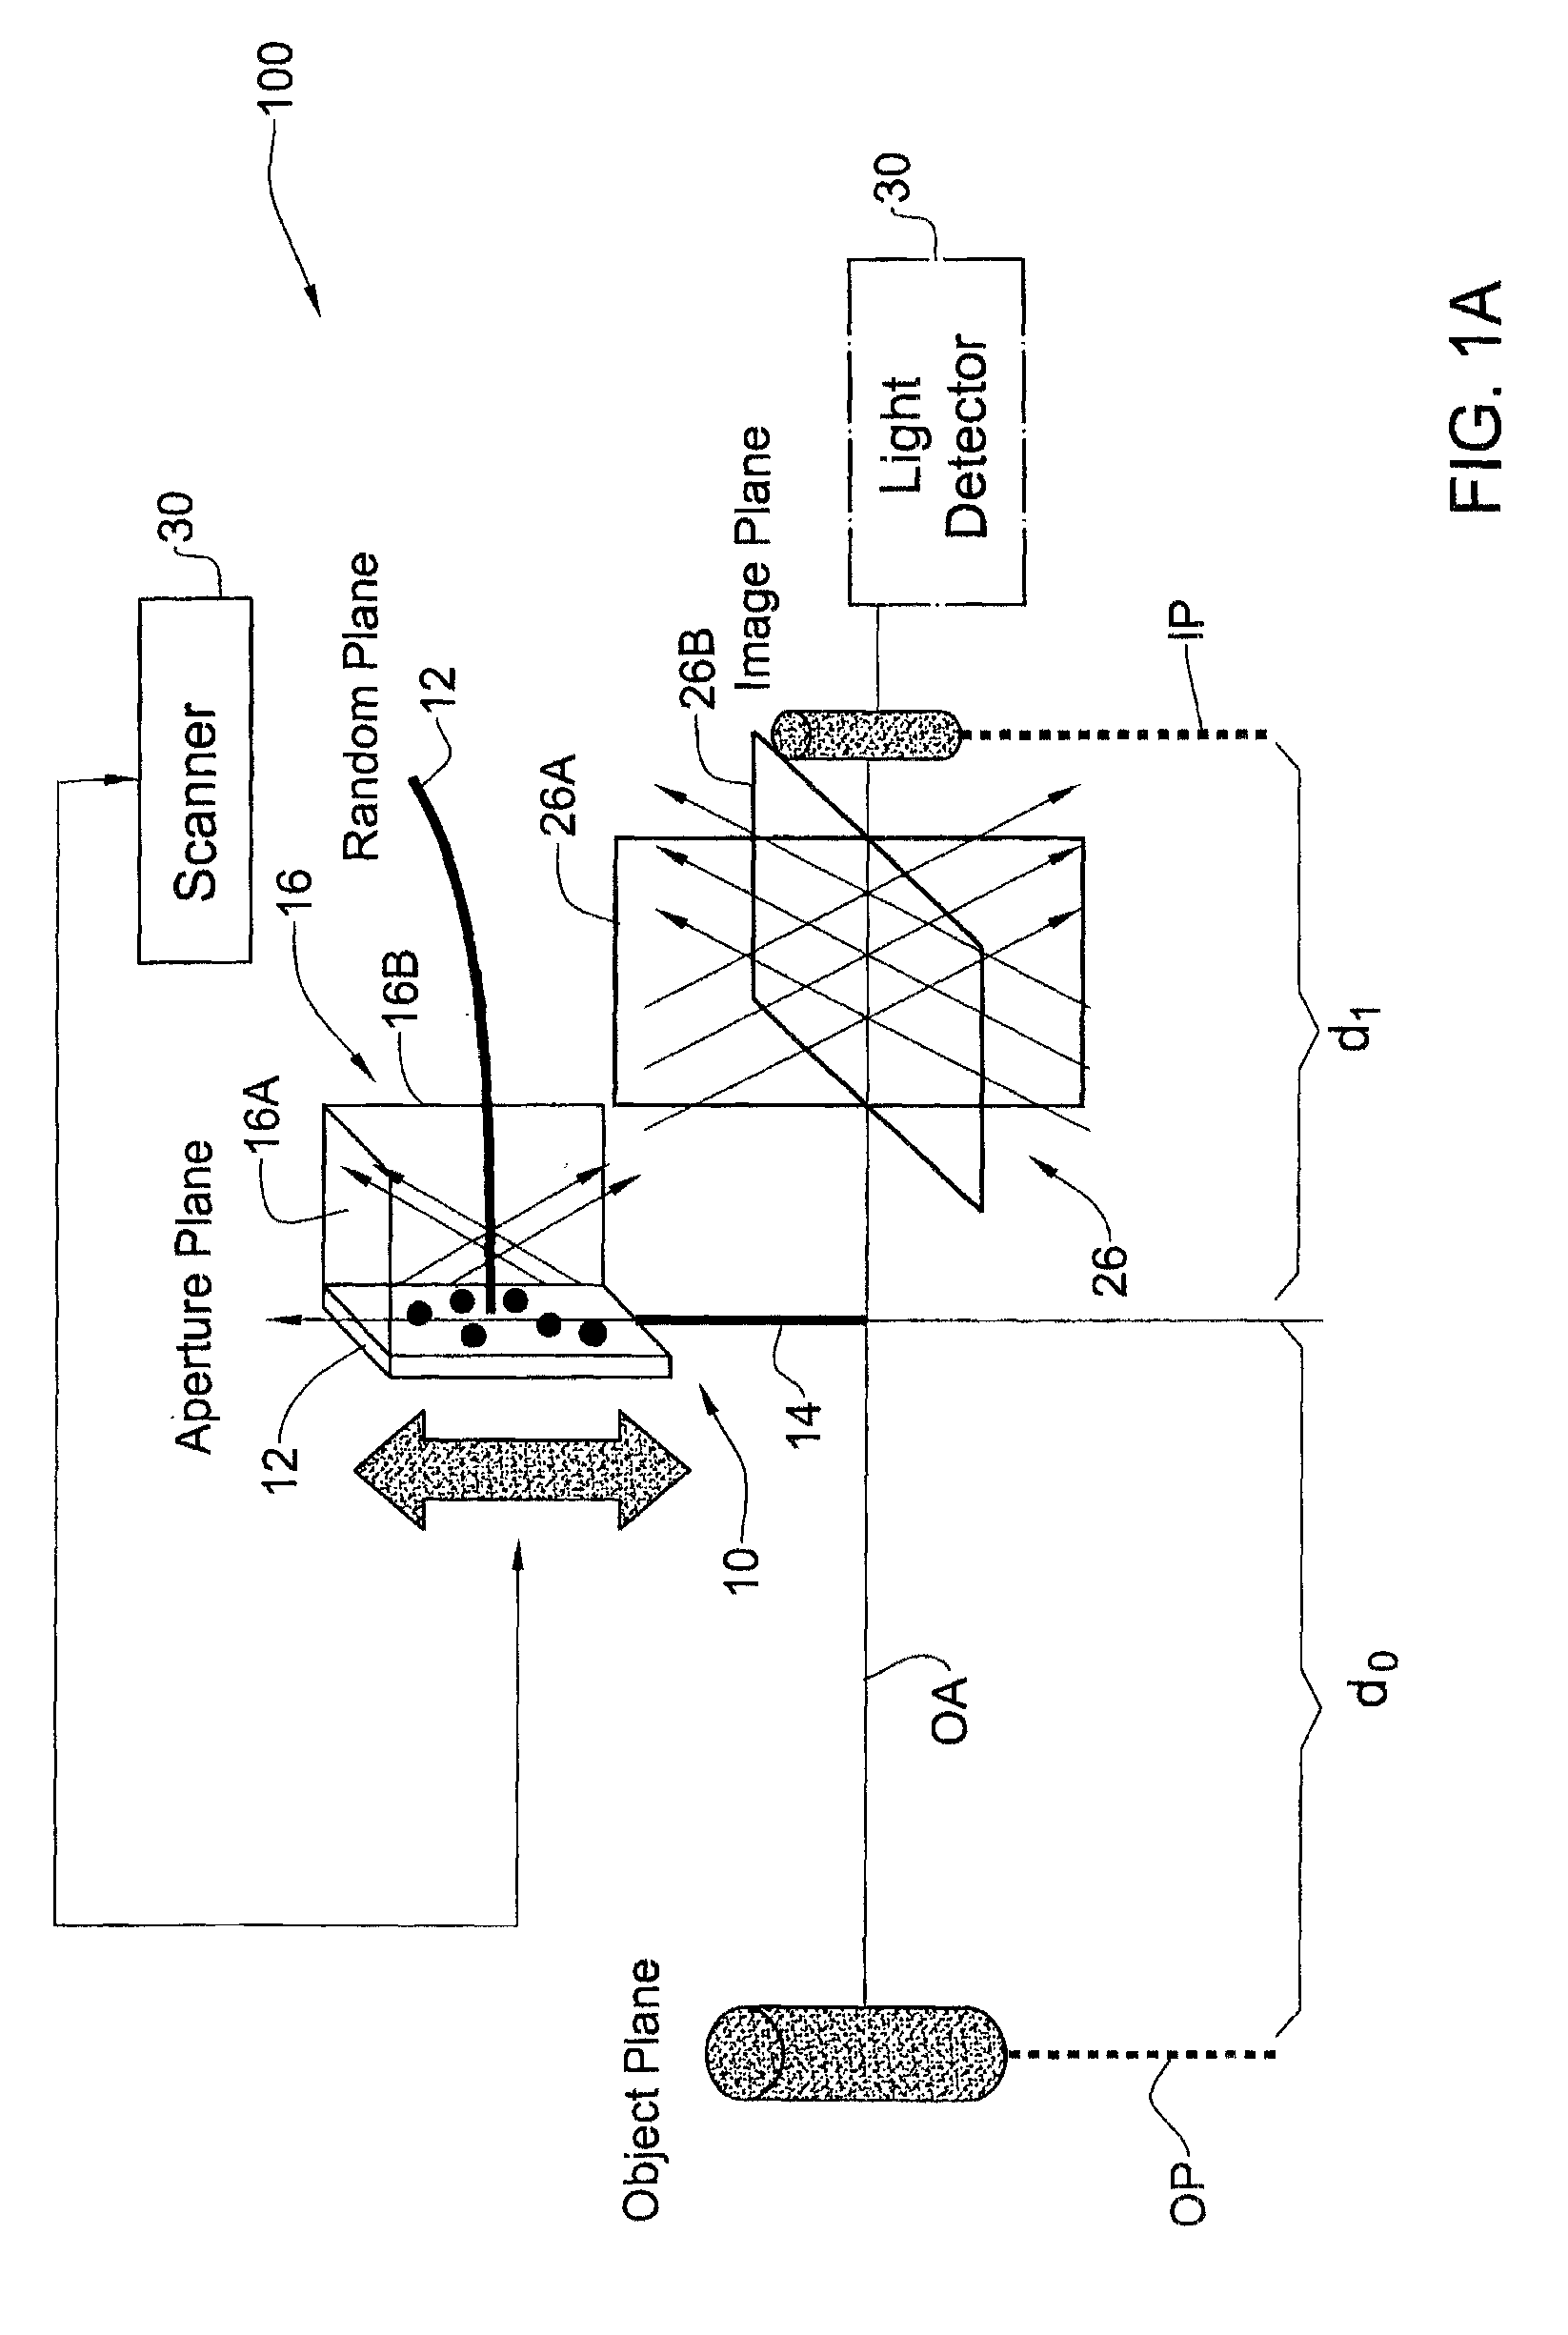 System and Method for Imaging with Extended Depth of Focus and Incoherent Light